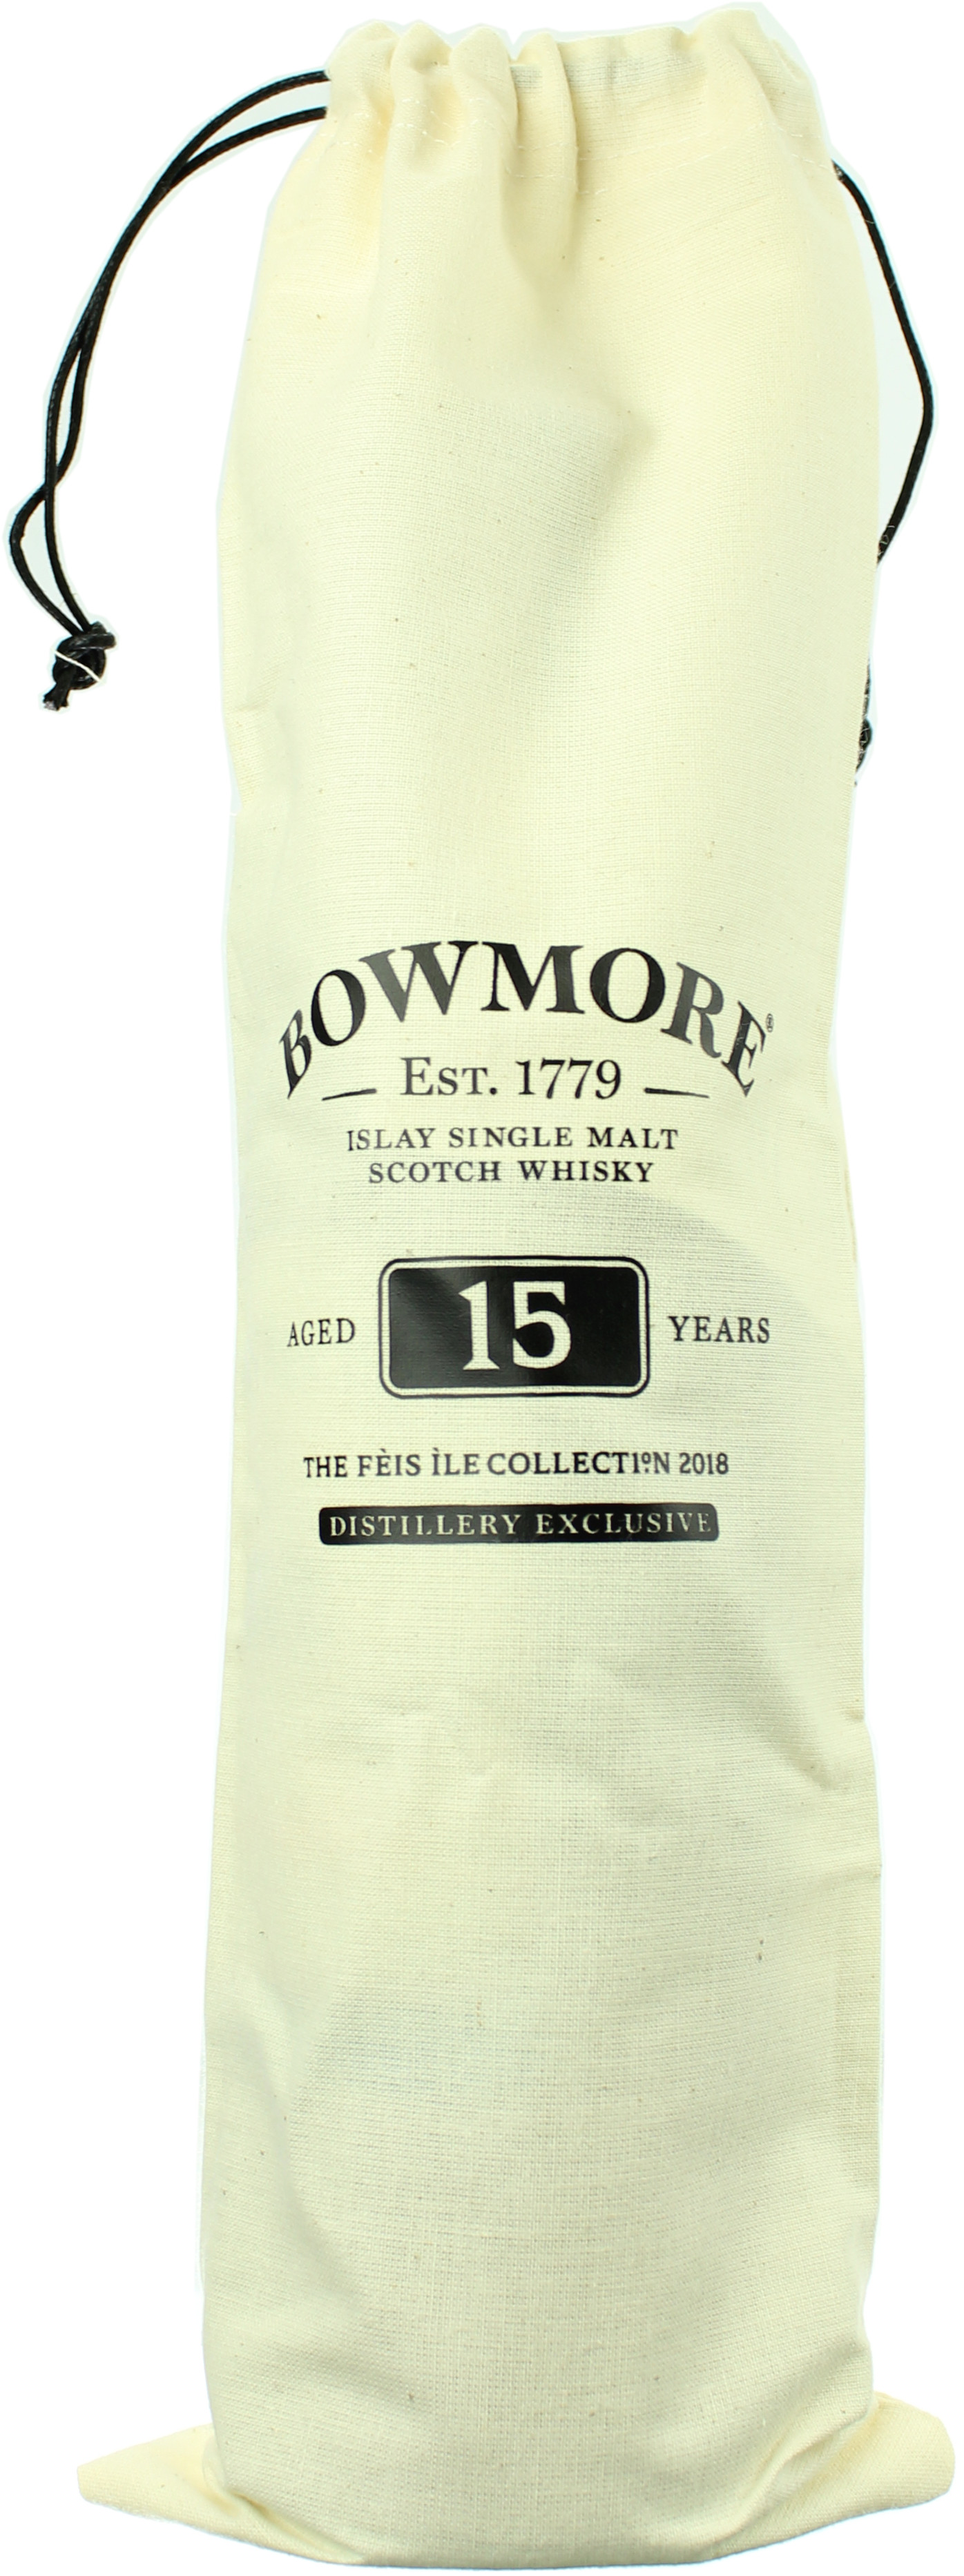 Bowmore 15 Jahre The Feis Ile Collection 2018 52.5% 0,7l